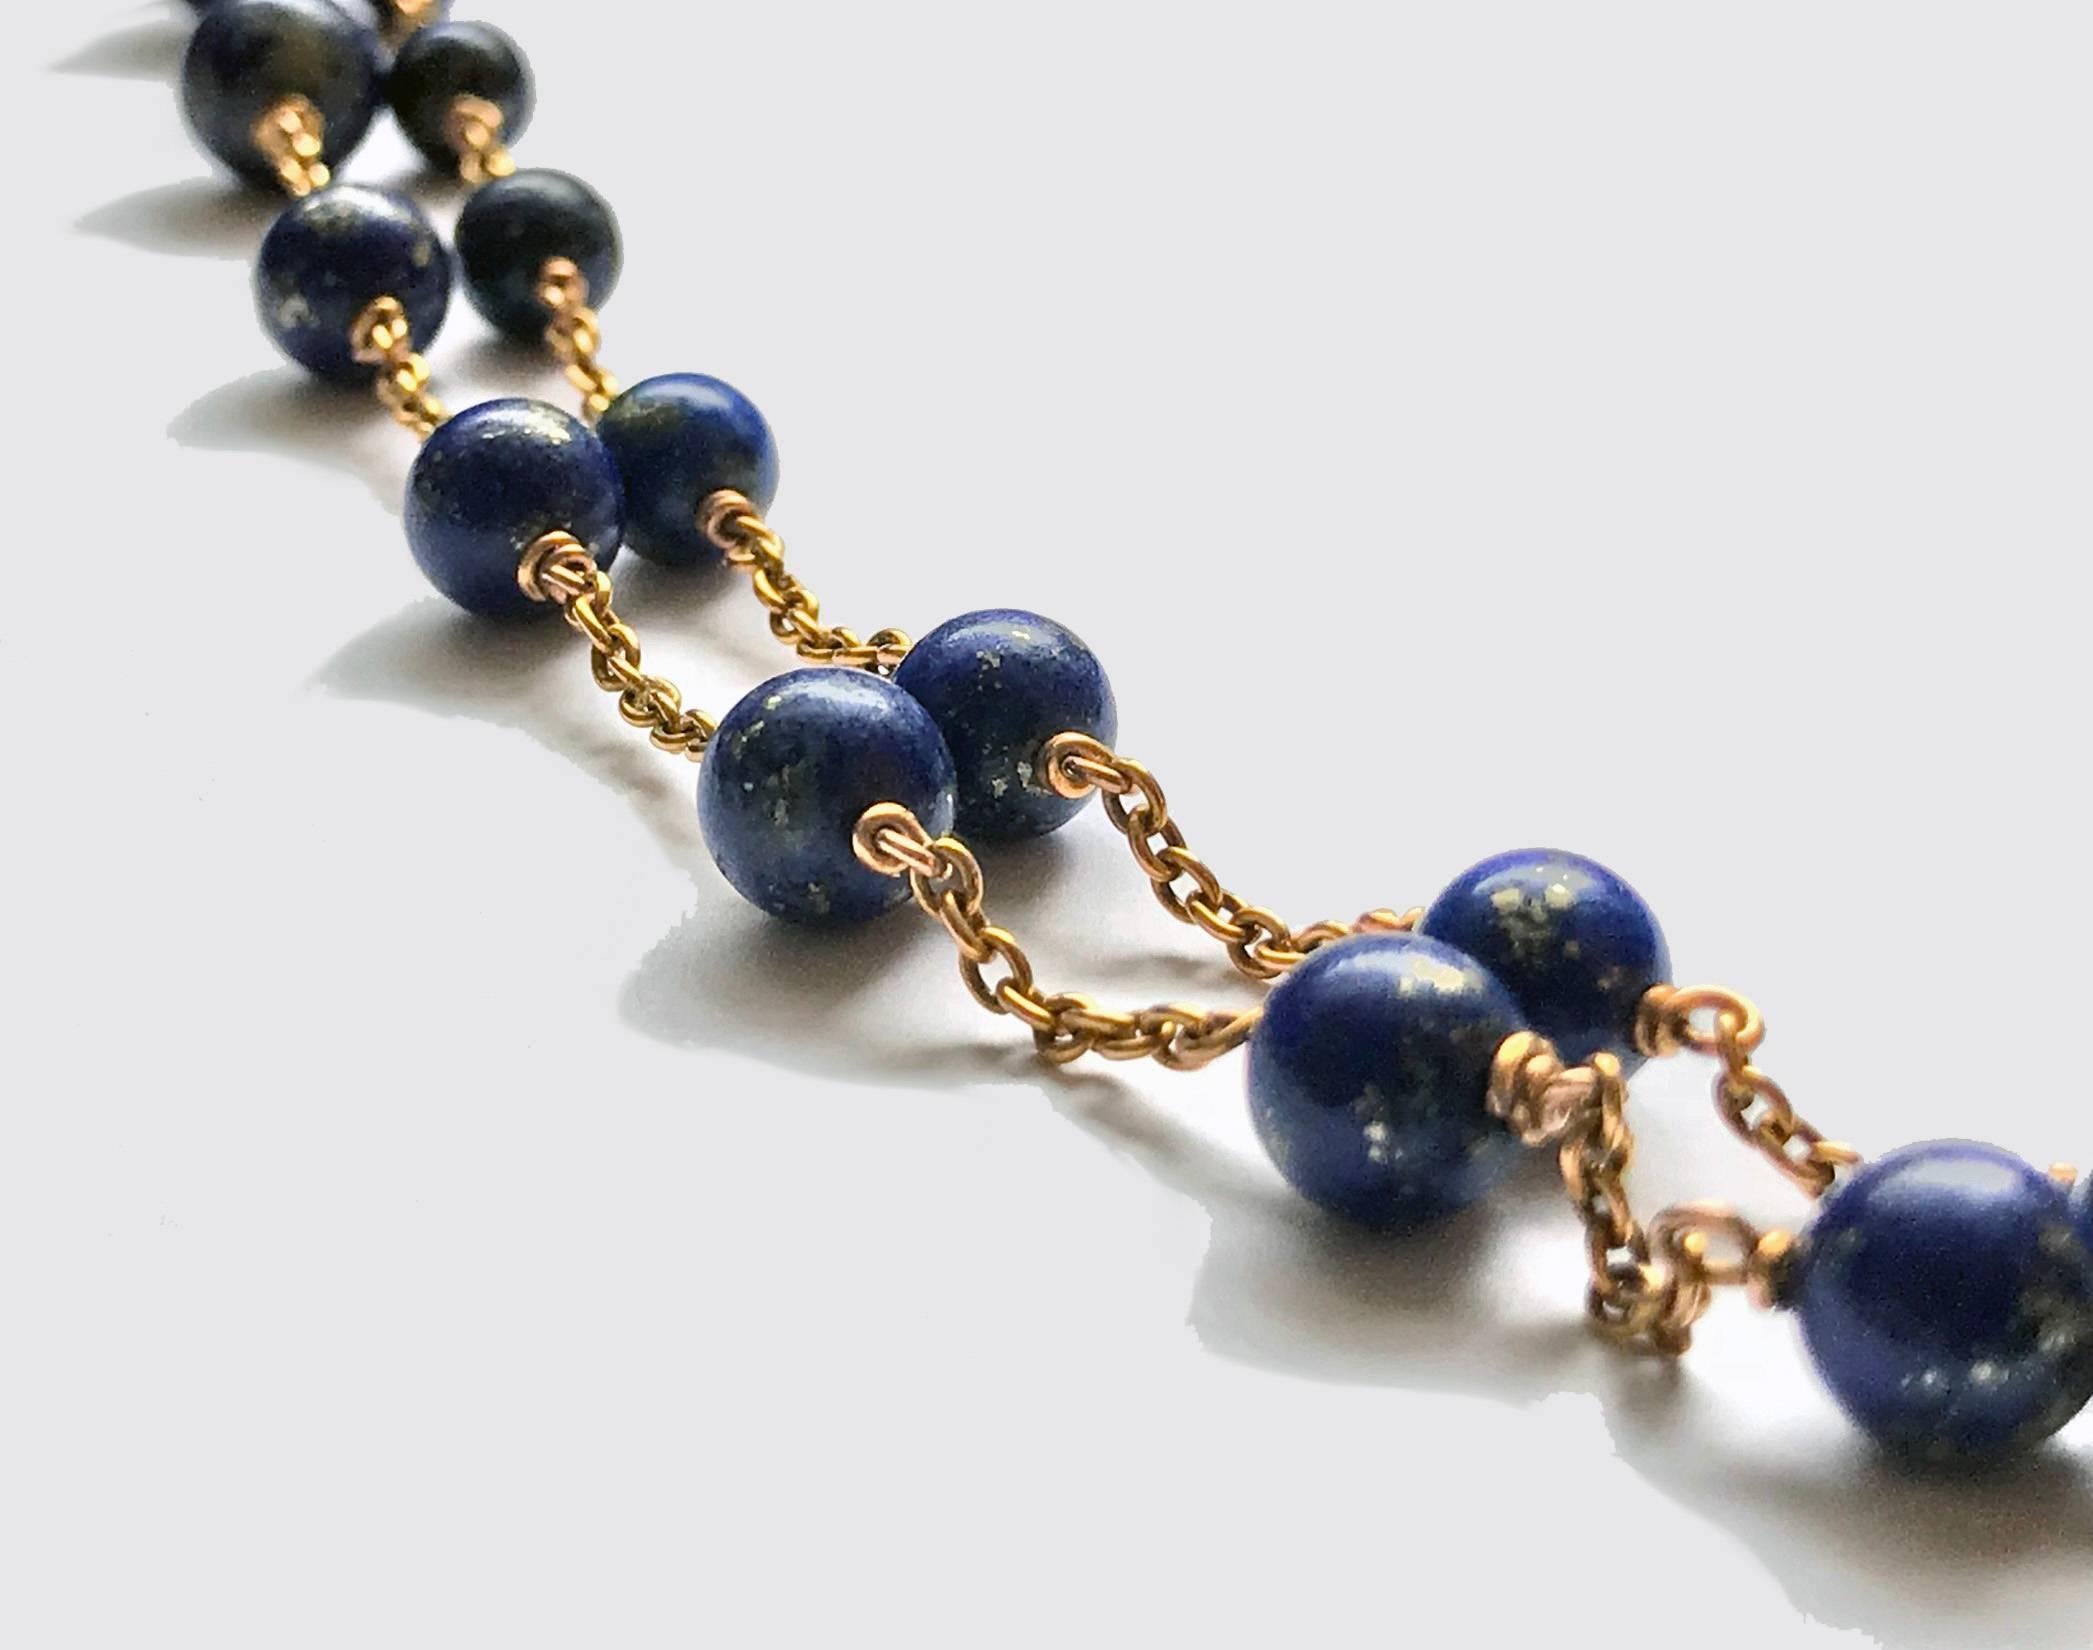 19th century Lapis lazuli and Gold Necklace. The Necklace comprising fifty three lapis lazuli beads gauging approximately  5.00 – 8.70 mm, dark blue with pyrite inclusions, 15K gold curb link chain between, terminating with spring ring fastener